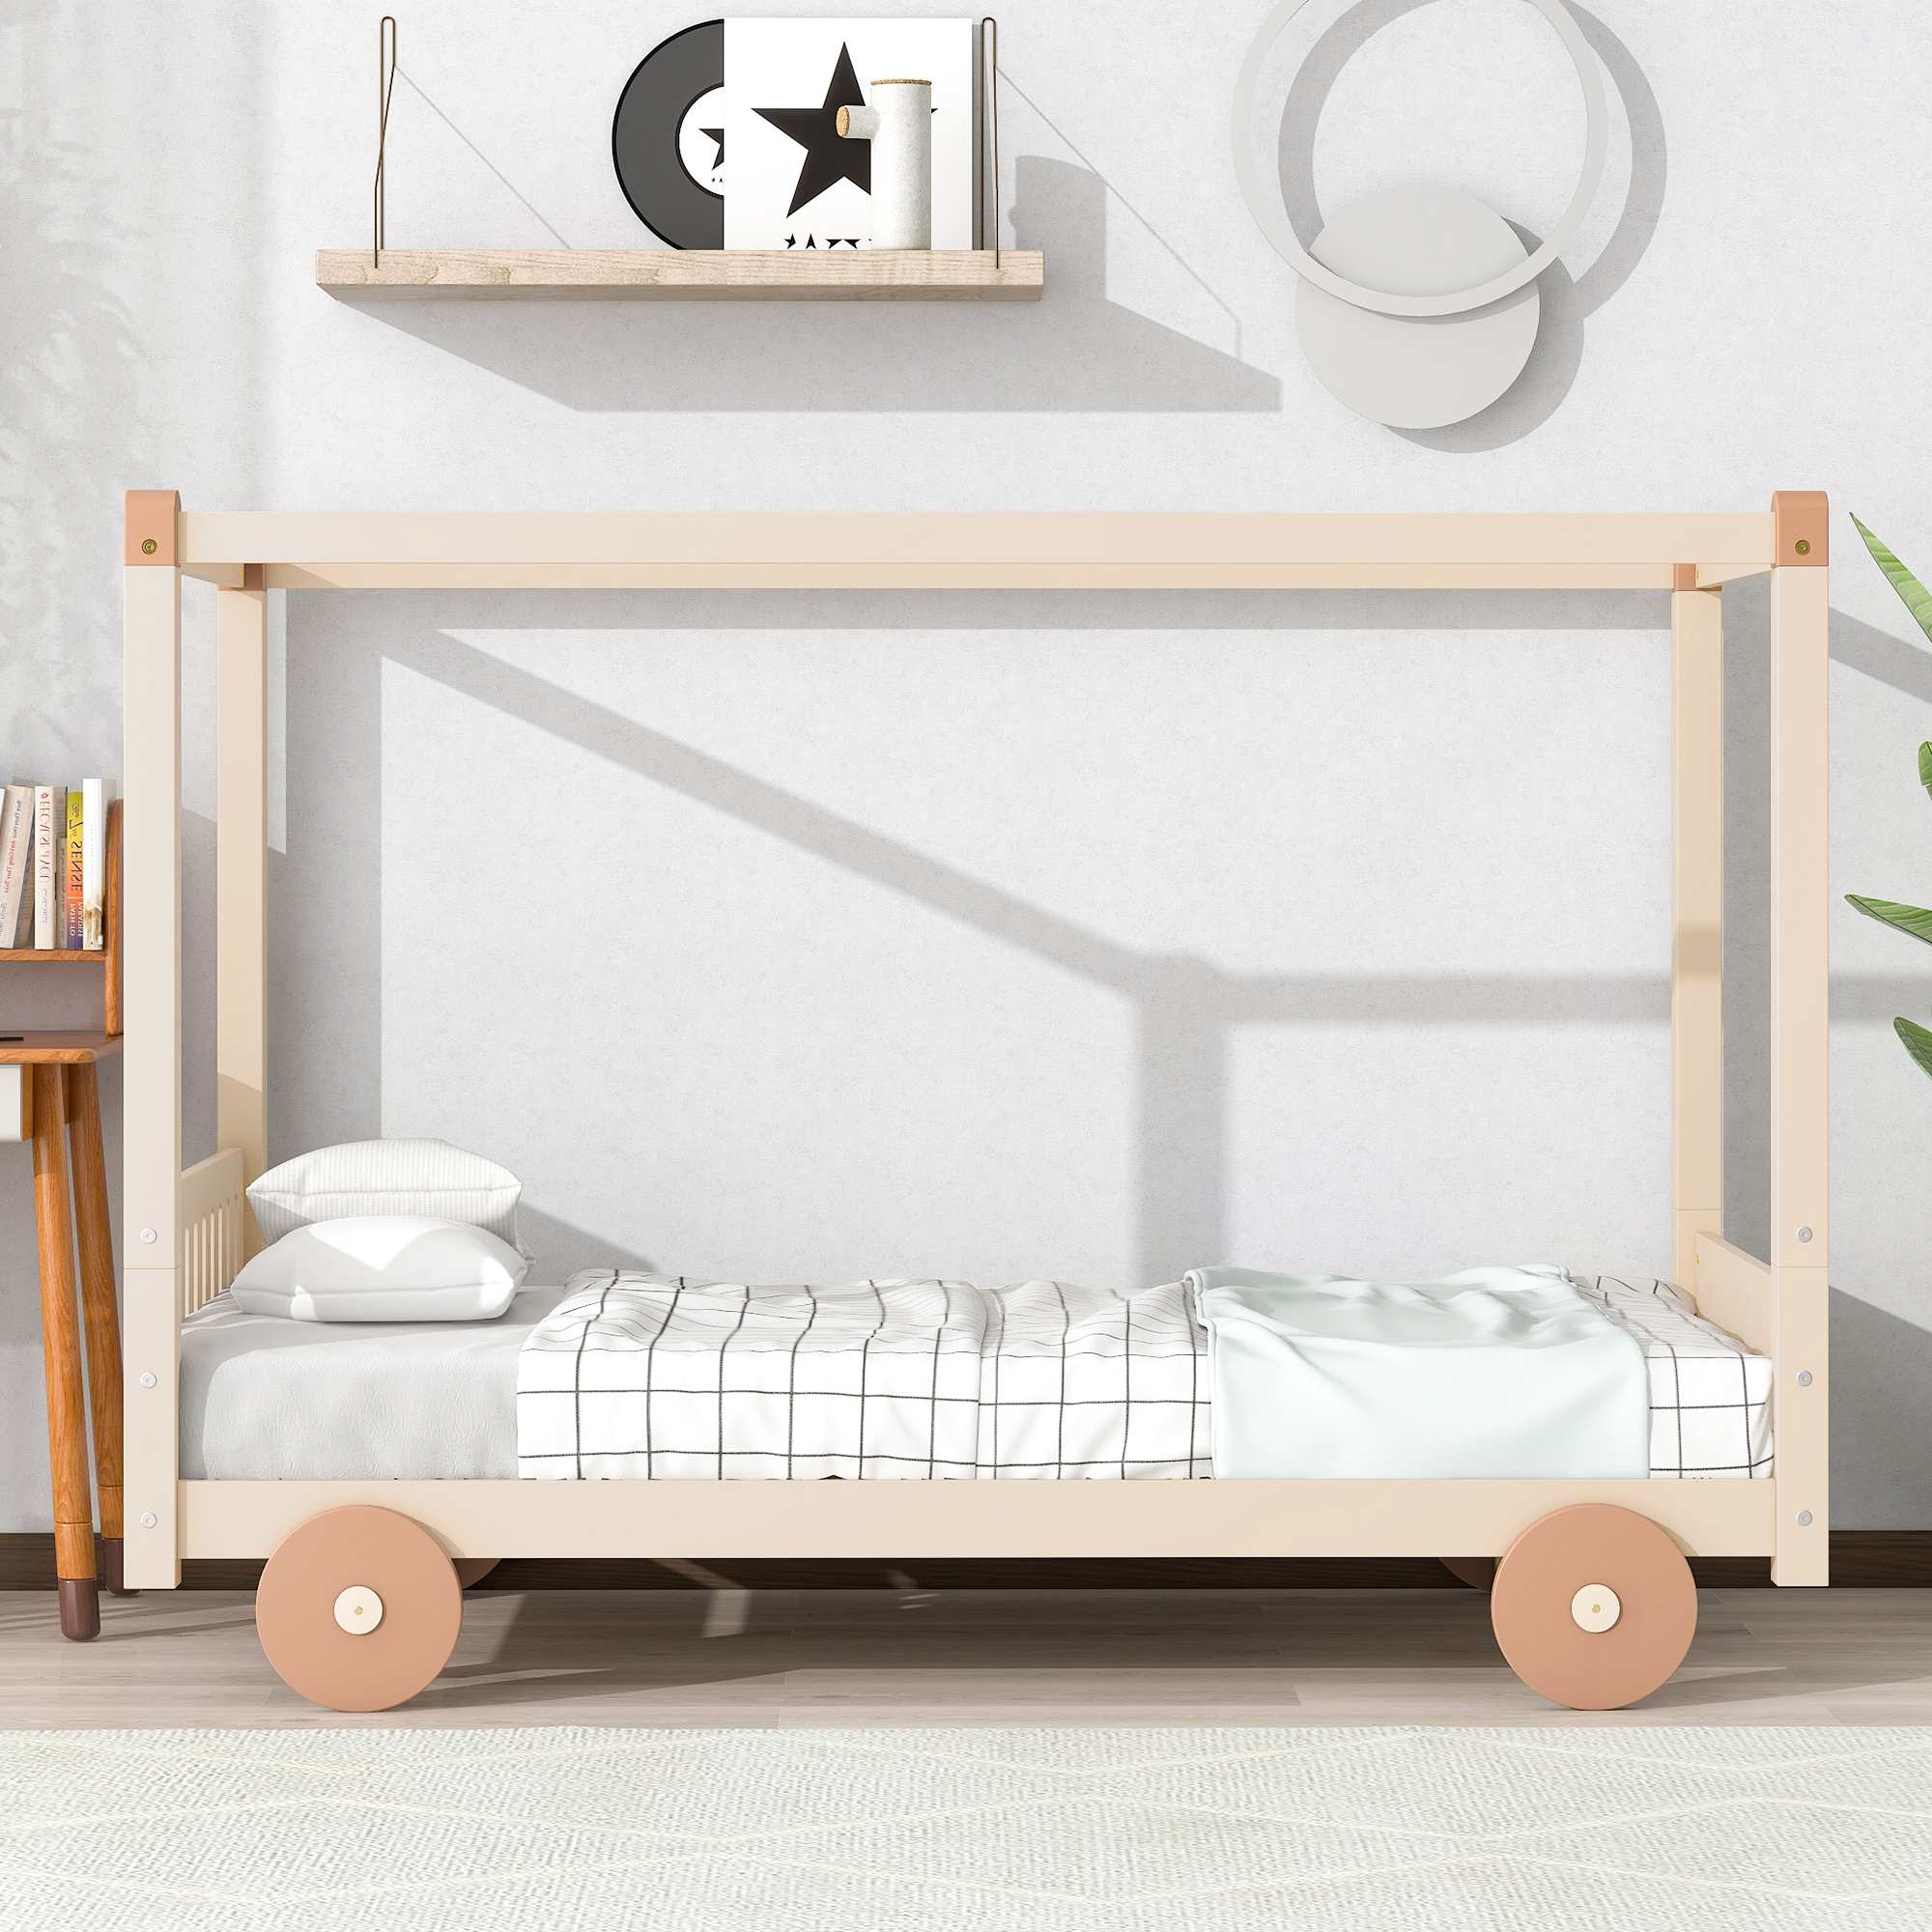 Artlia Twin Size Canopy Car-Shaped Platform Bed,Natural+Brown - image 5 of 7